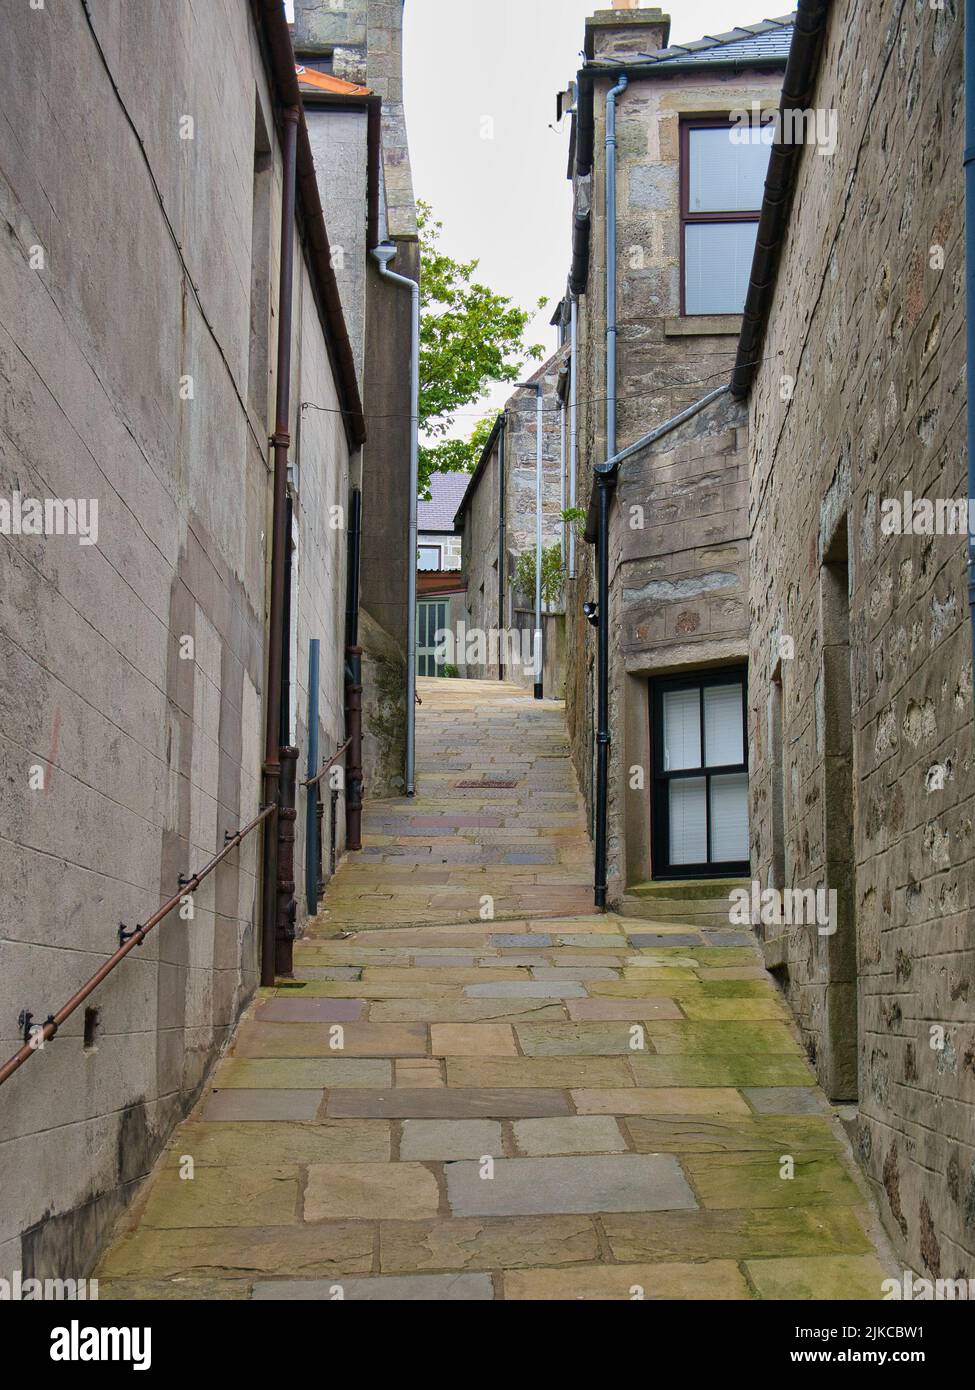 A narrow, steep footpath with green moss on some flagstones between buildings in Lerwick, Shetland, UK. A handrail appears on the left. Stock Photo